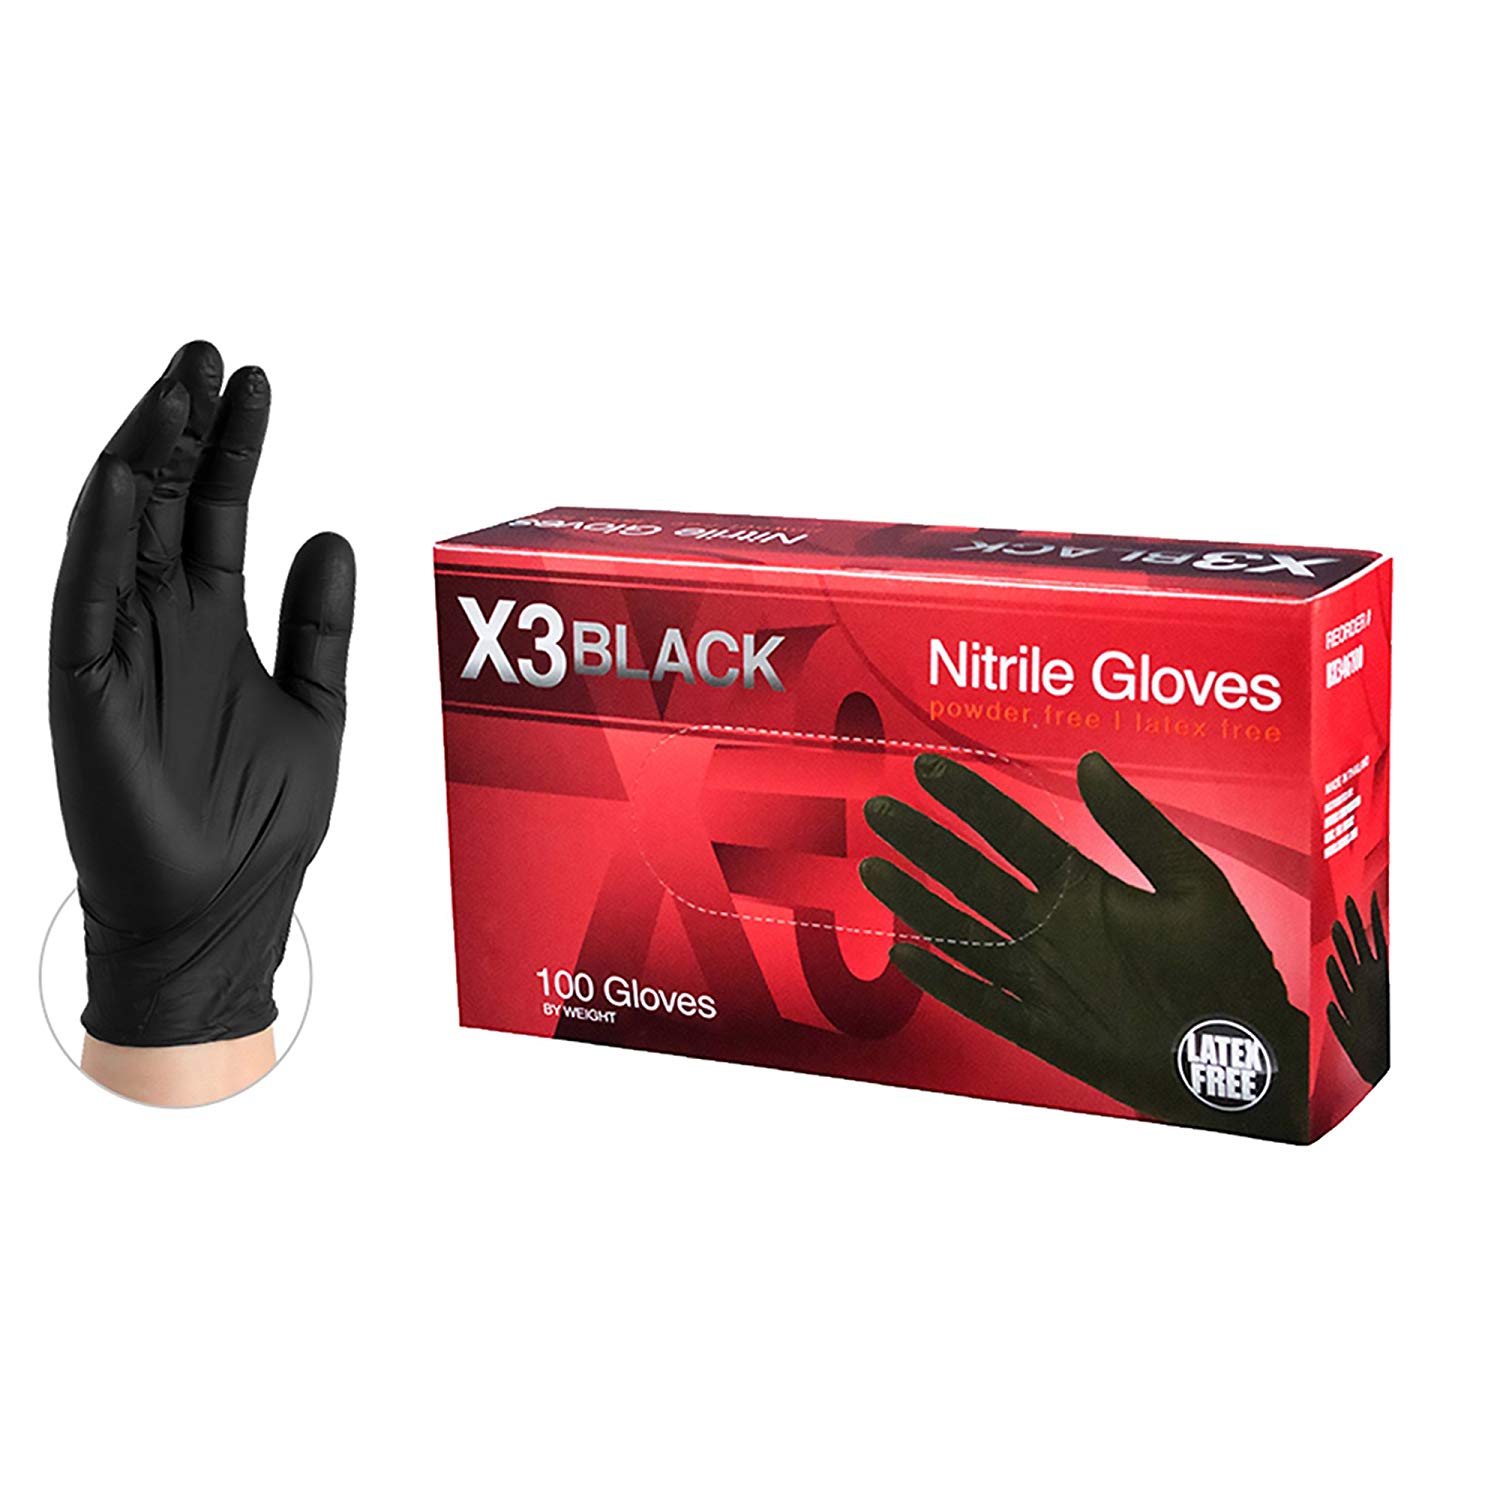 anthony louis recommends latex gloves anal fisting pic